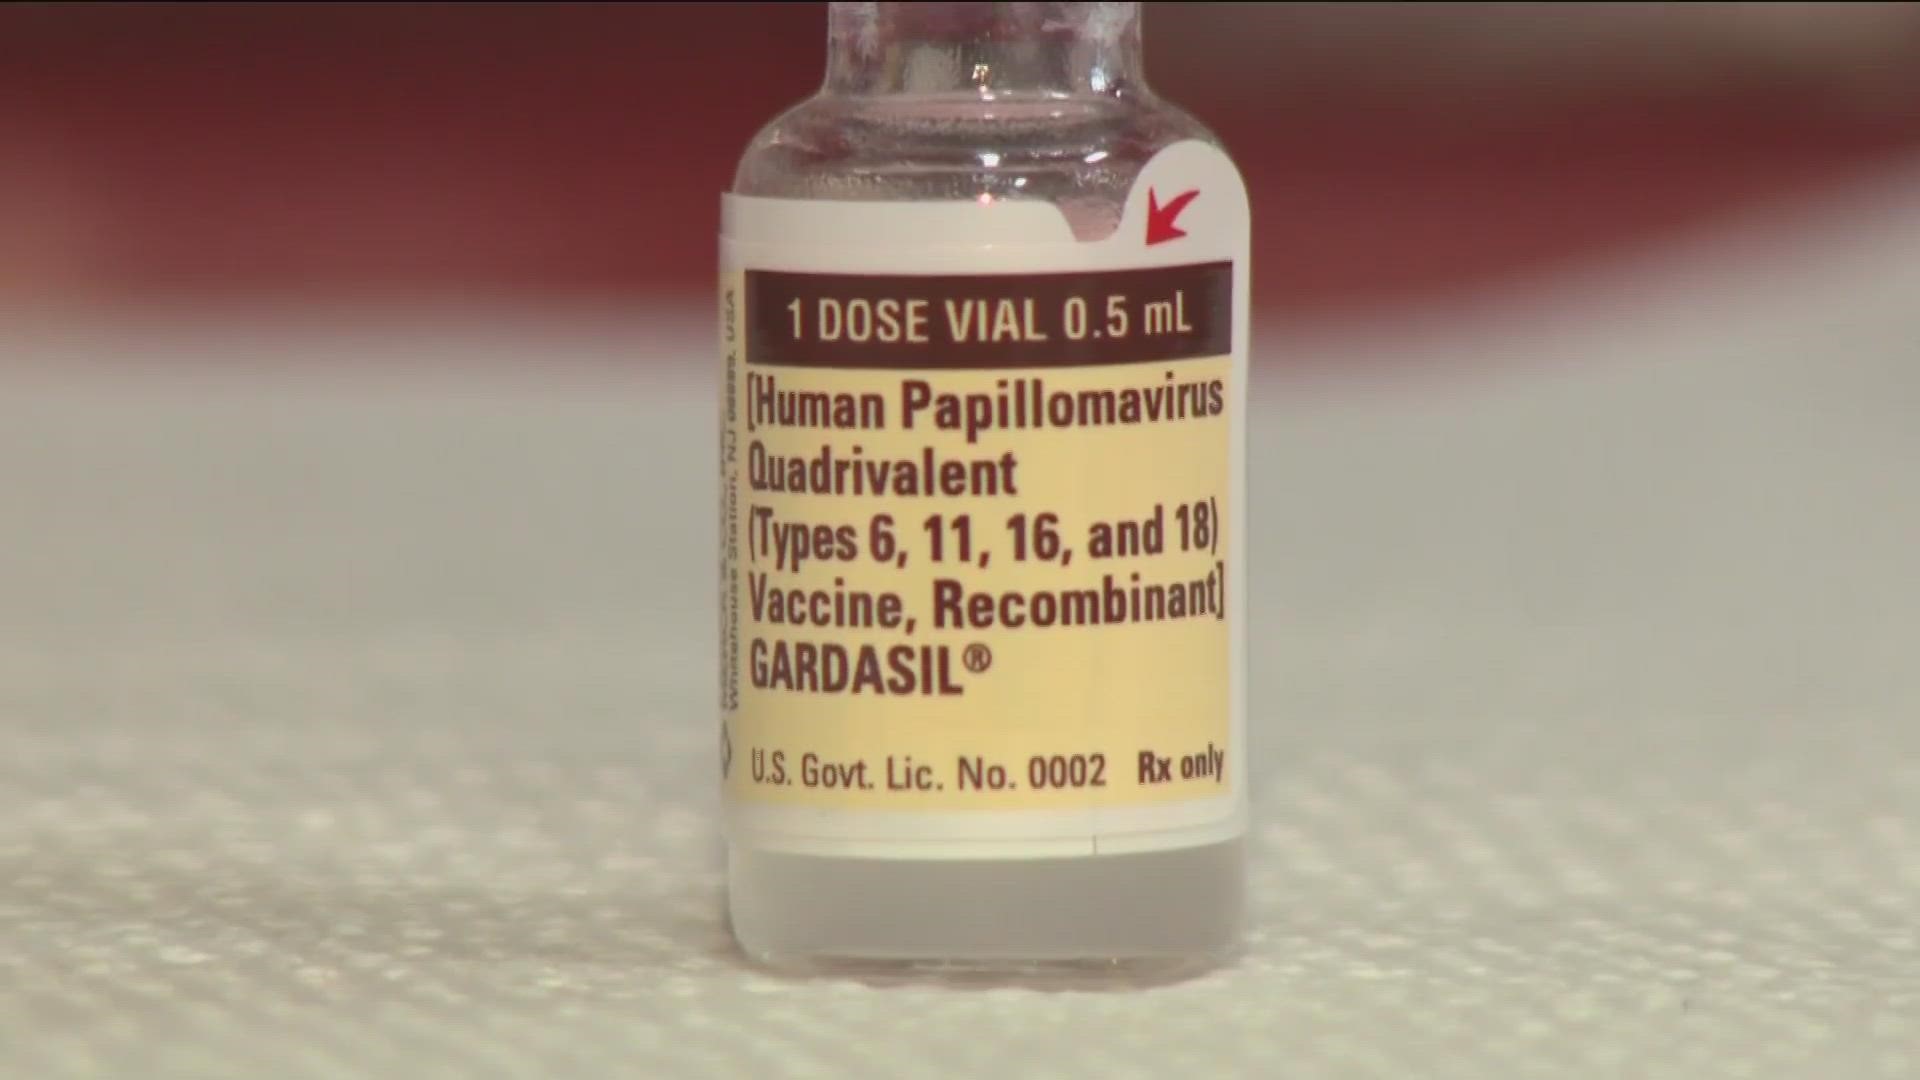 The HPV vaccine, which was first approved in 2006, has continually been proven safe and effective in preventing a number of cancers, according to doctors.